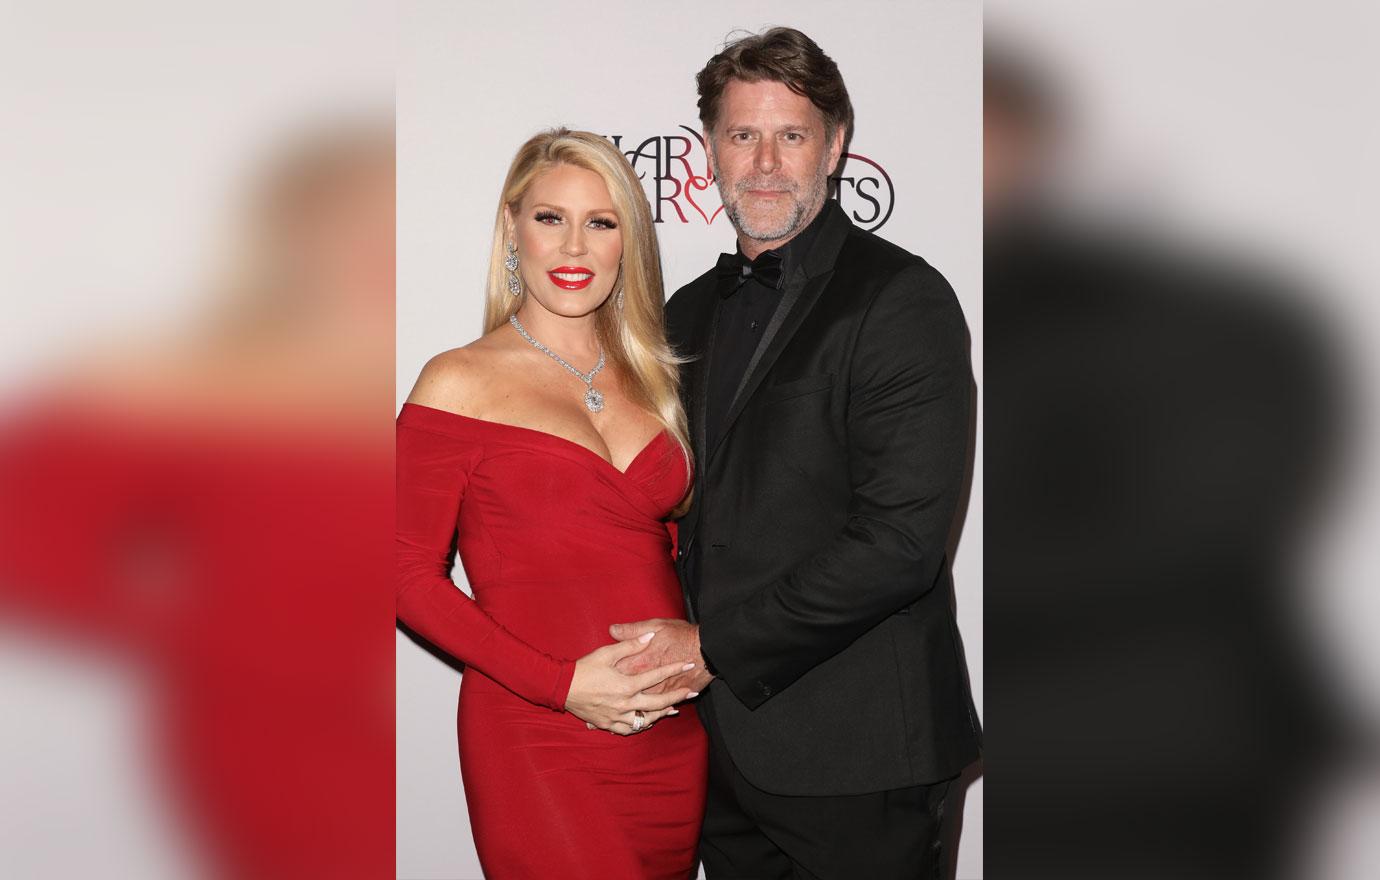 RHOC Very Pregnant Gretchen Rossi Shares Near-Naked Snap picture